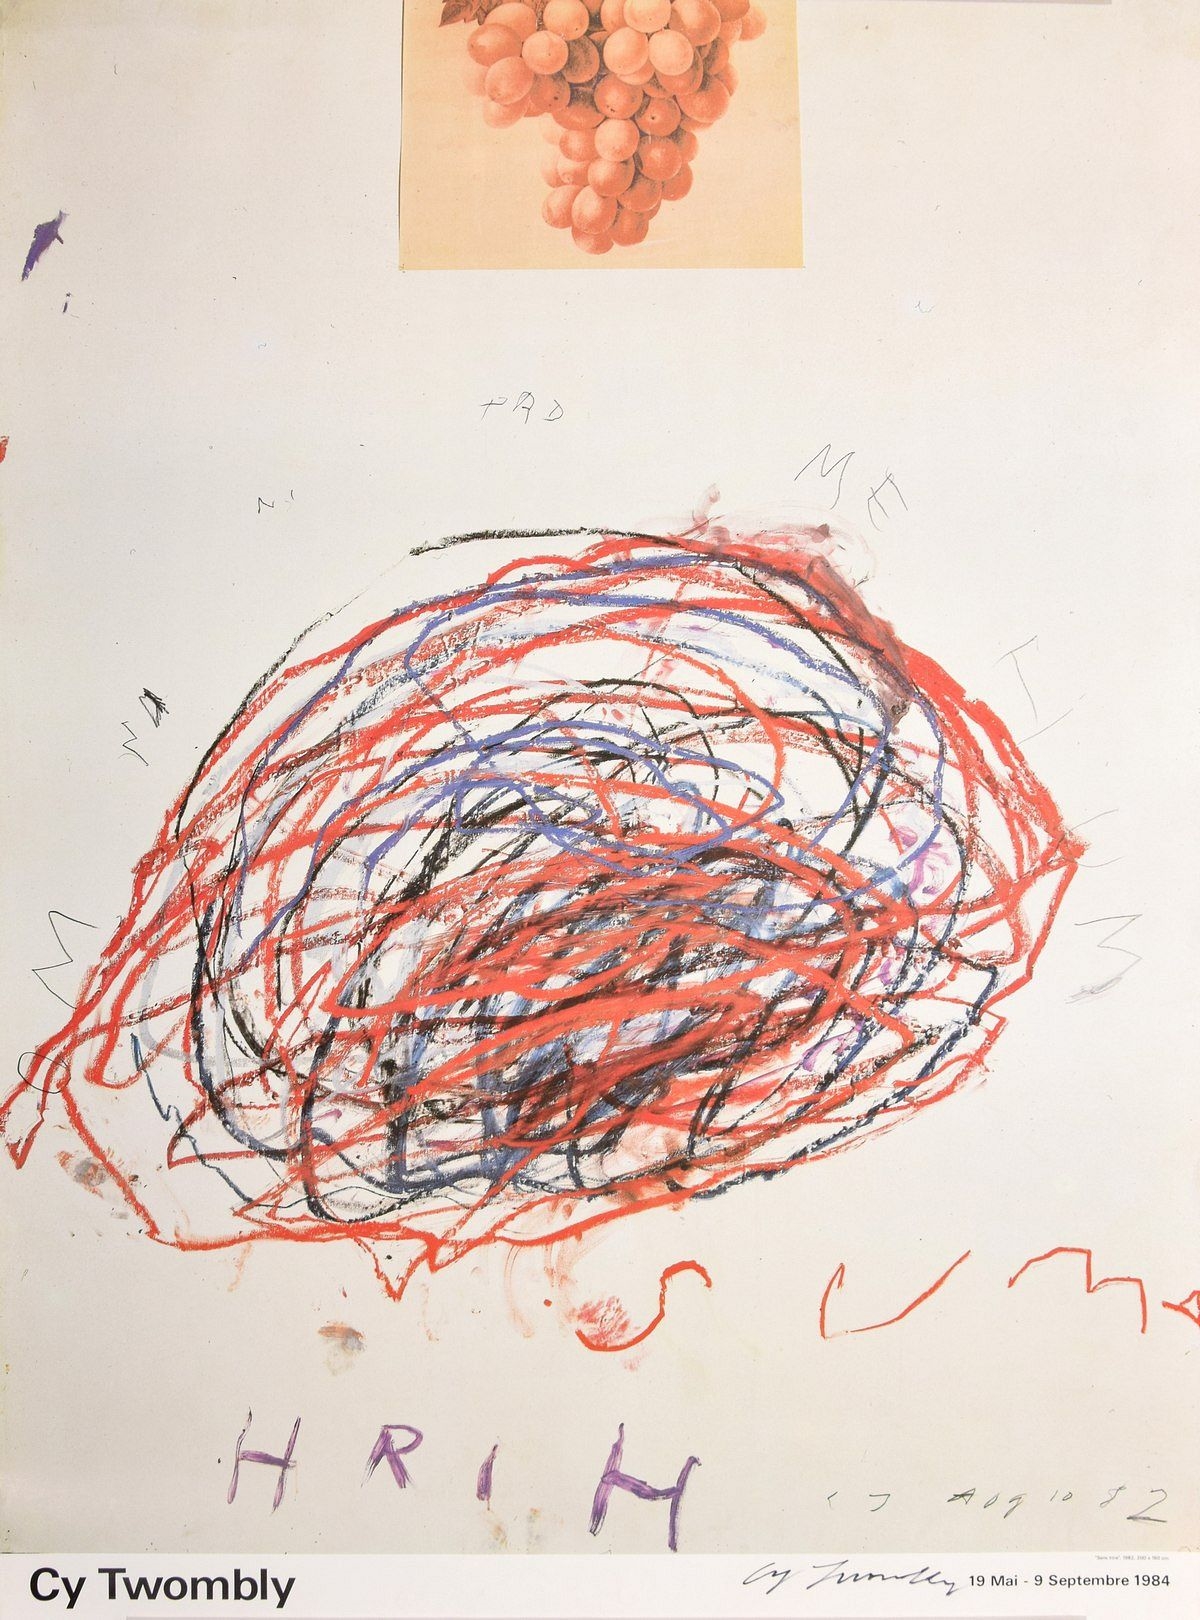 Cy Twombly | Poster (1984) | MutualArt